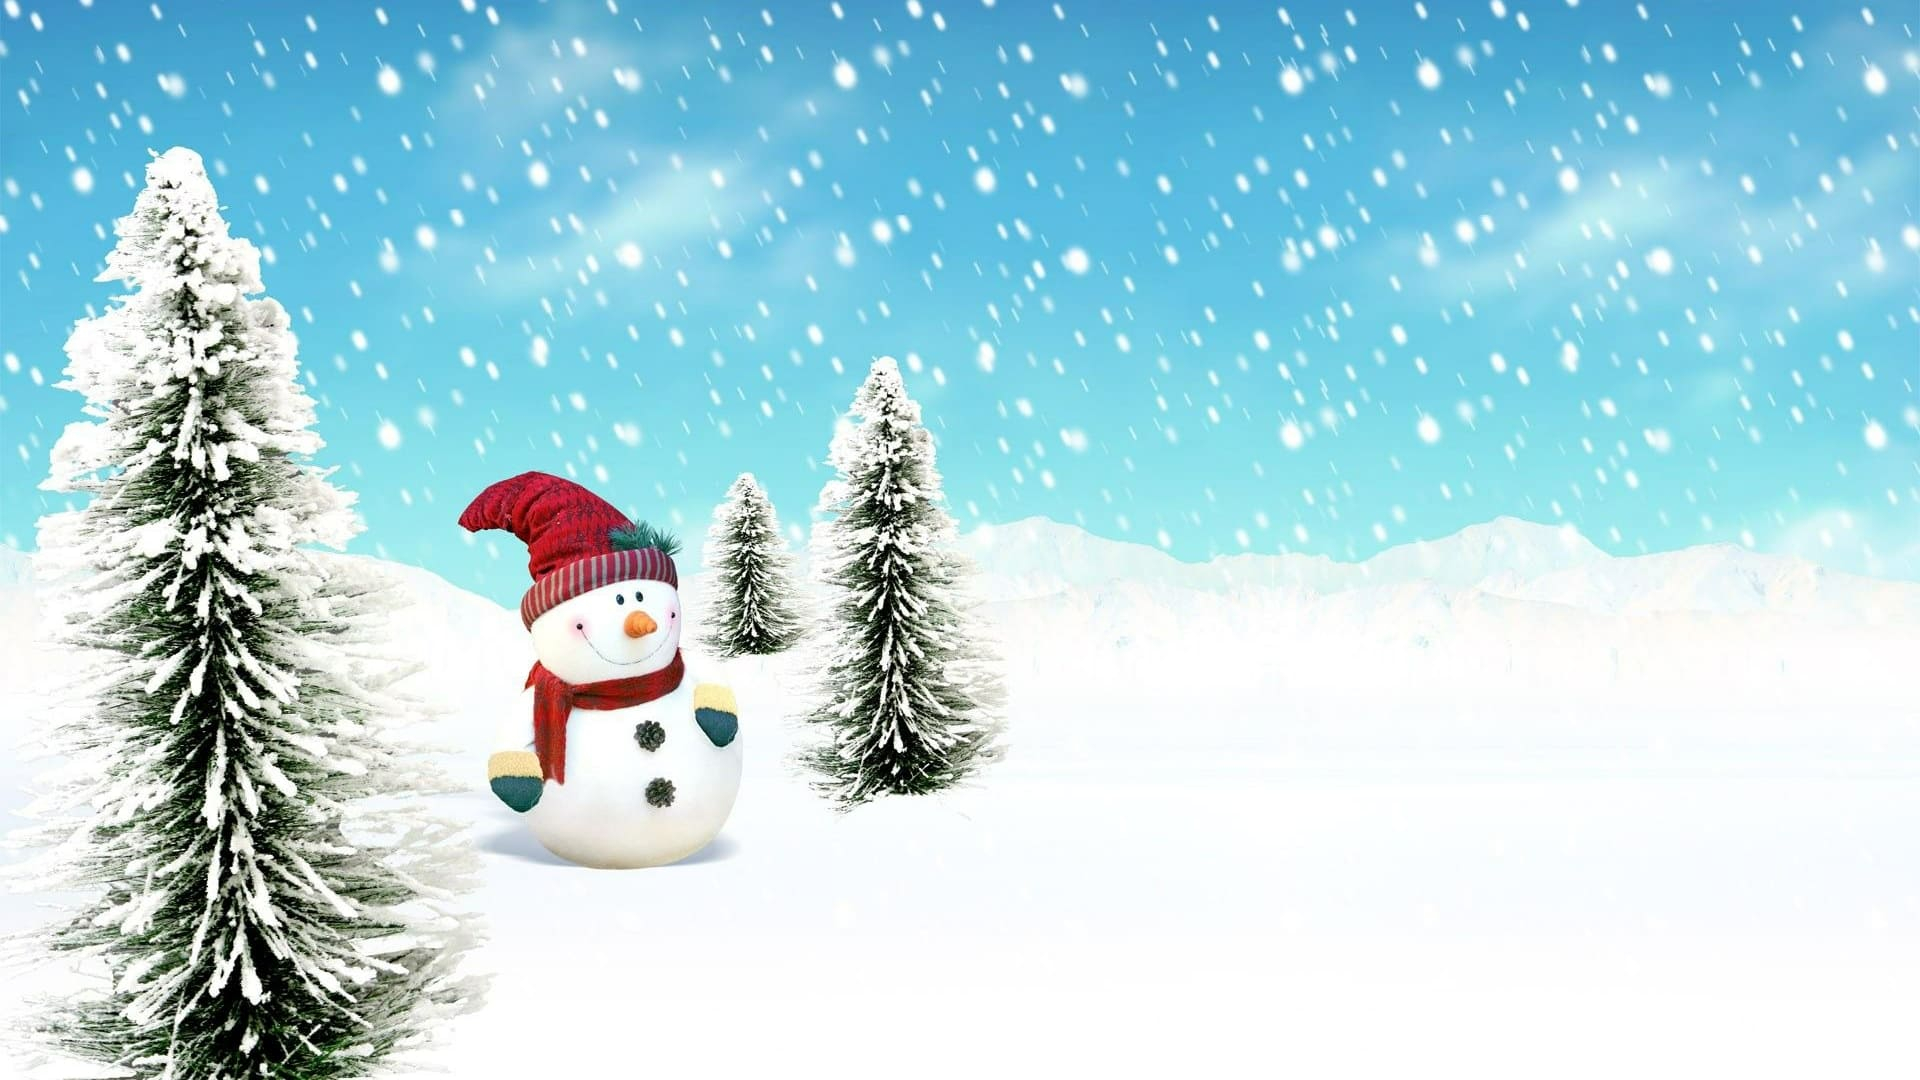 1920x1080 Snowman Wallpapers : Top Free Snowman Backgrounds, Pictures \u0026 Images Download